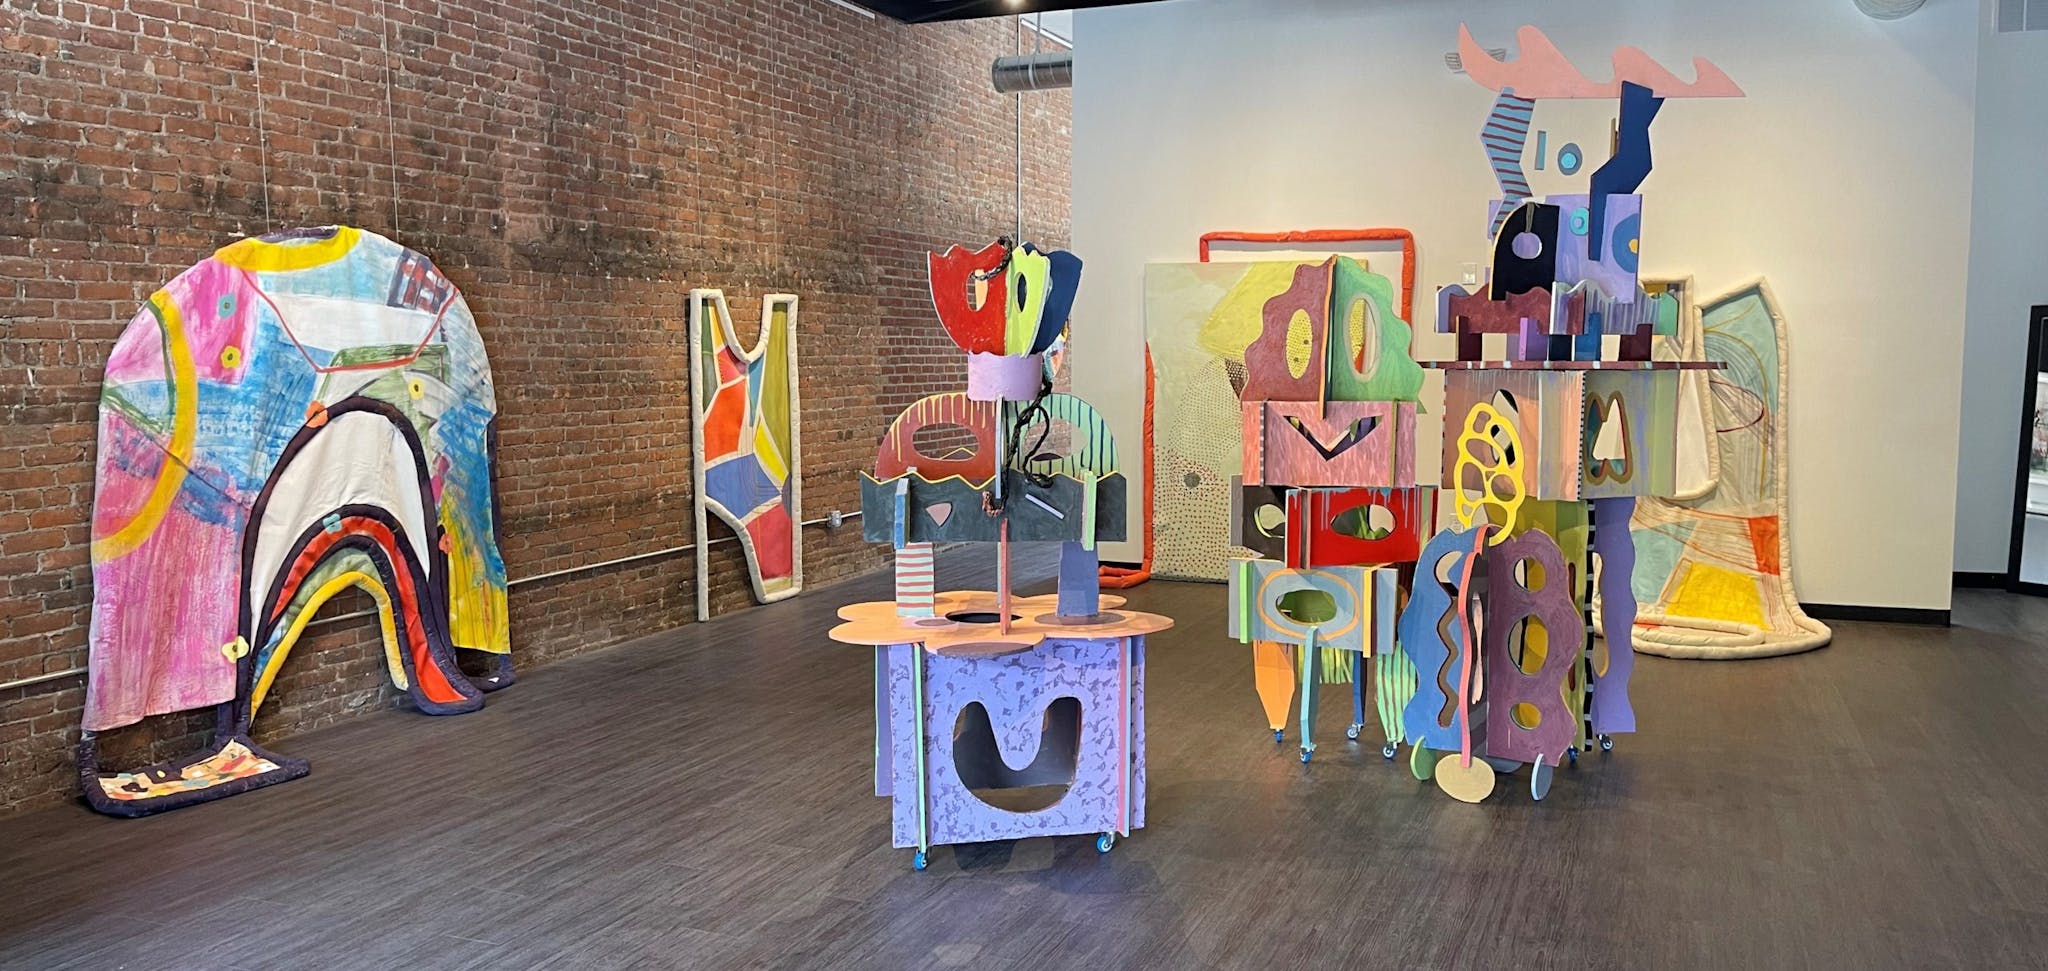 Colorful structures are positioned across the room, suggesting a play space.